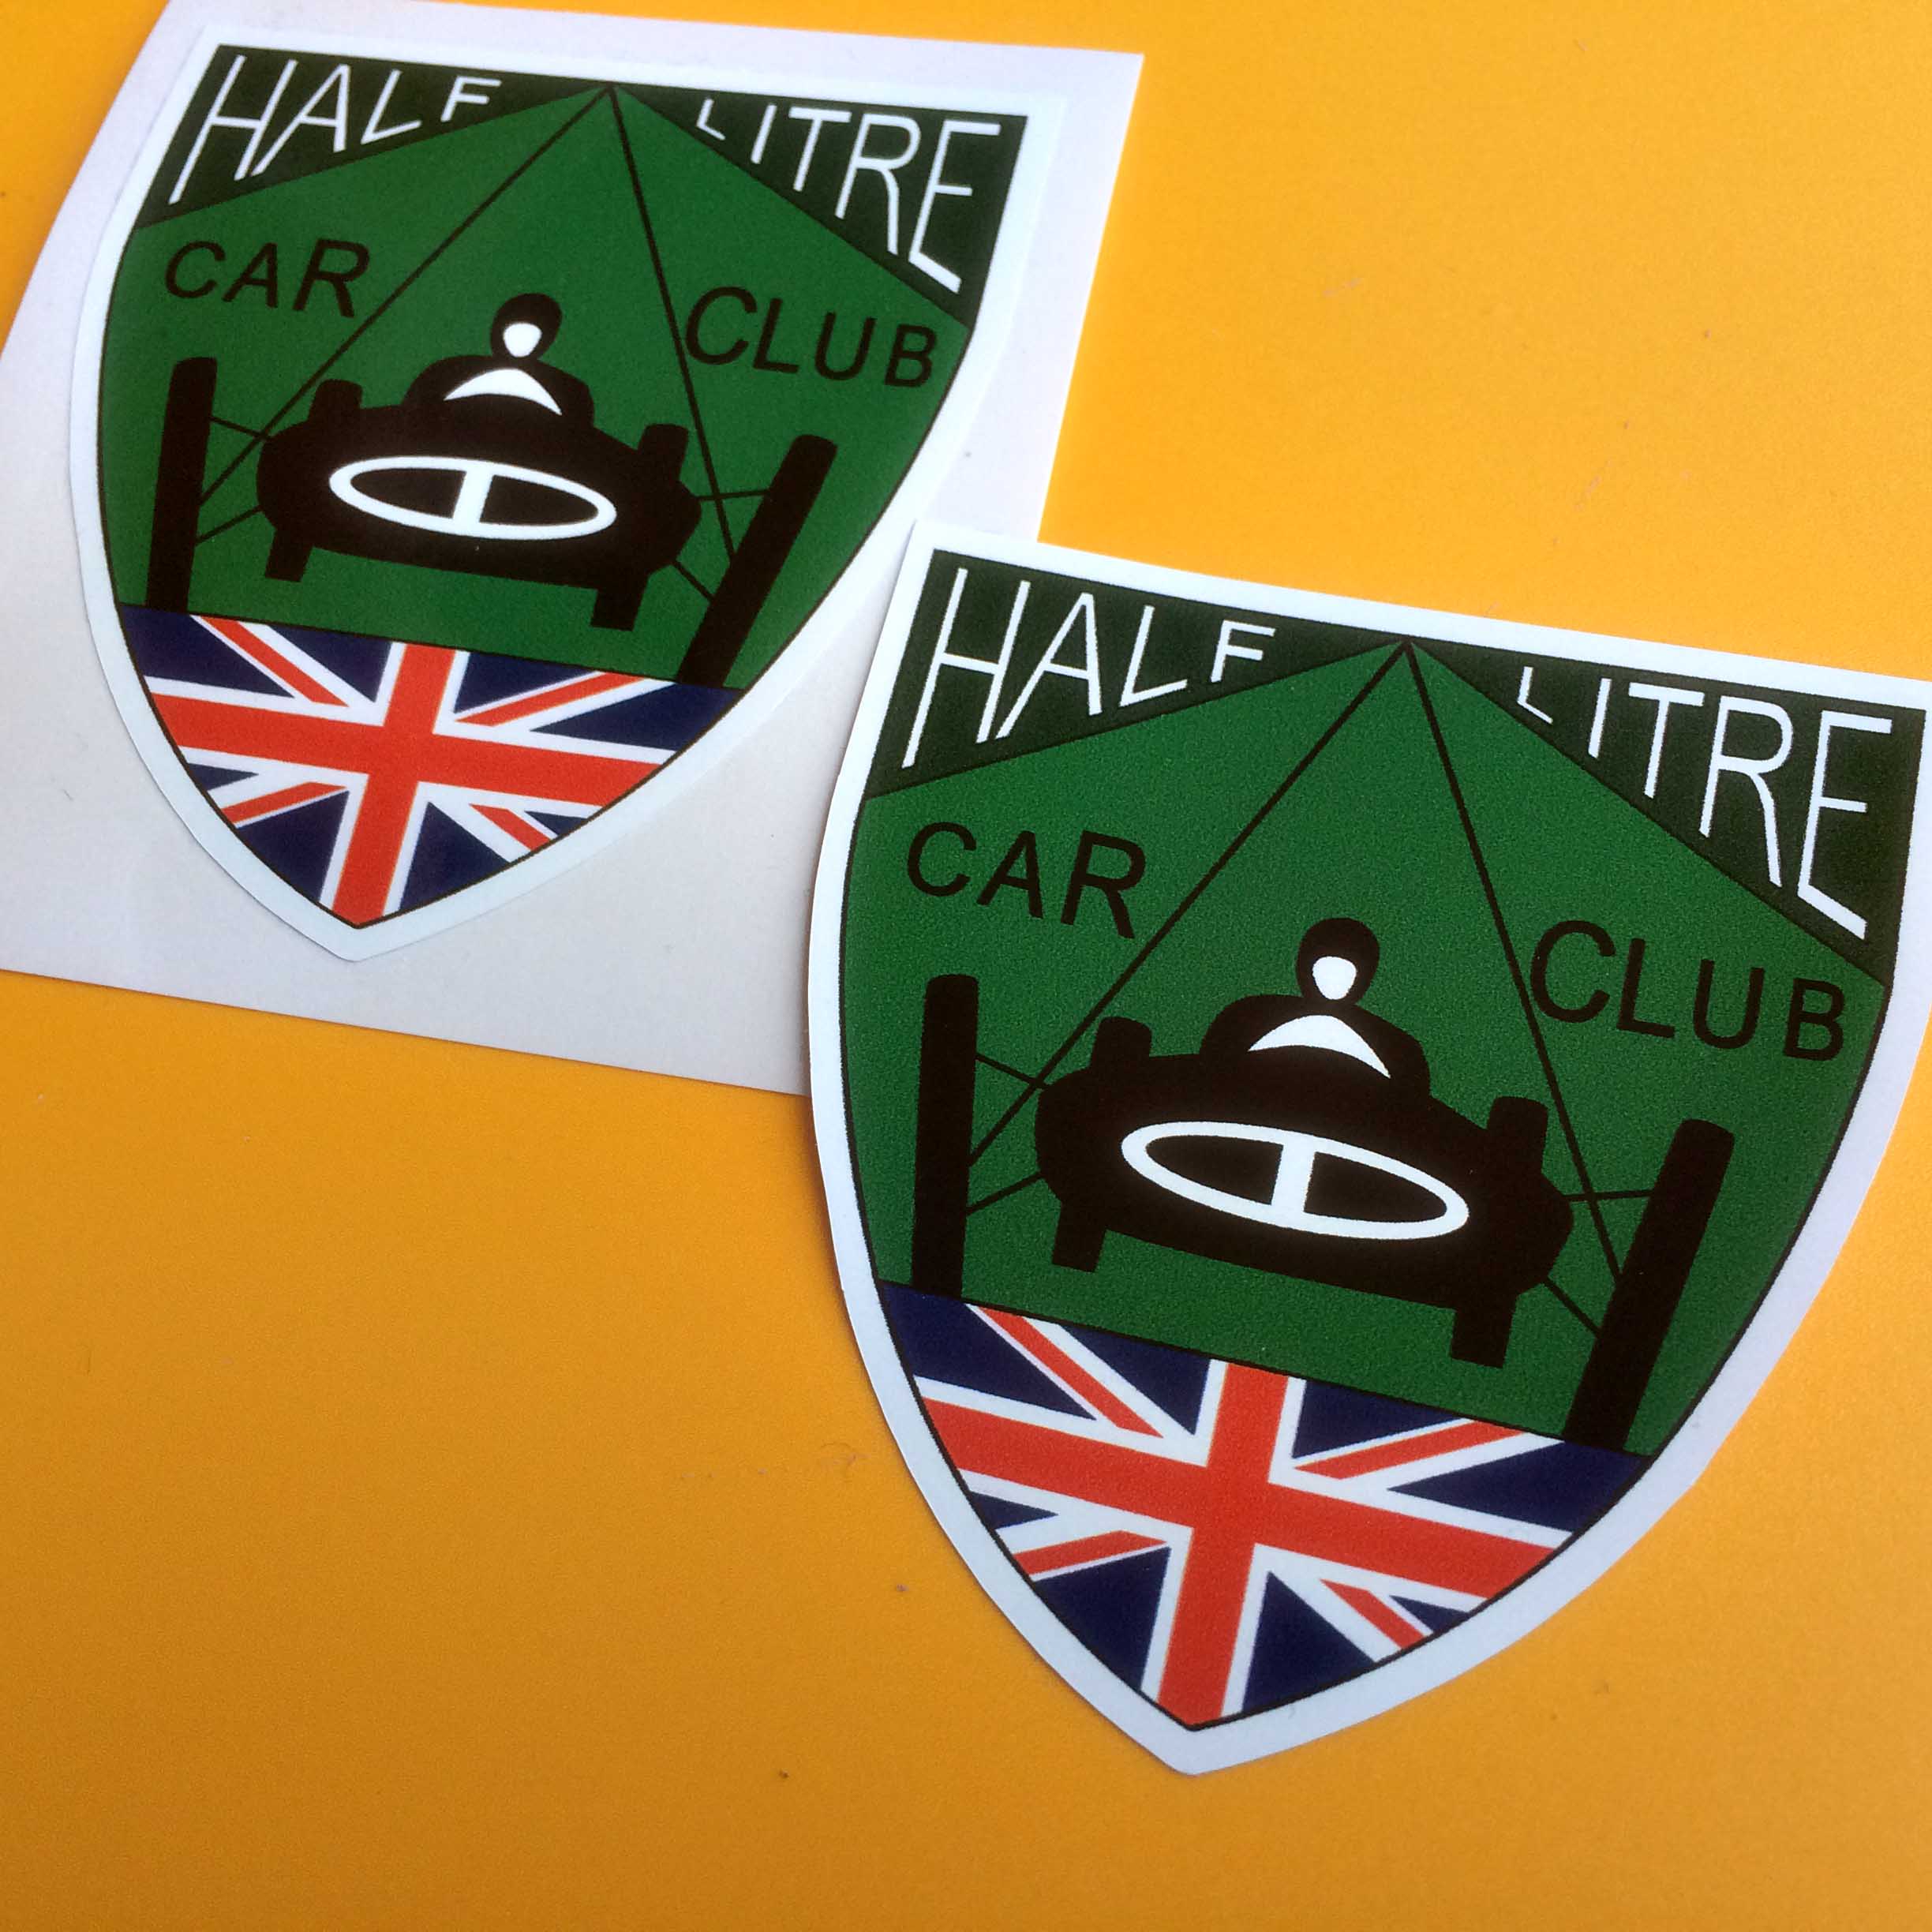 Half Litre Car Club in black and white lettering on a shield shaped sticker. In the centre is a black racing car driven by a man in white on a green racetrack. Below this is a Union Jack.